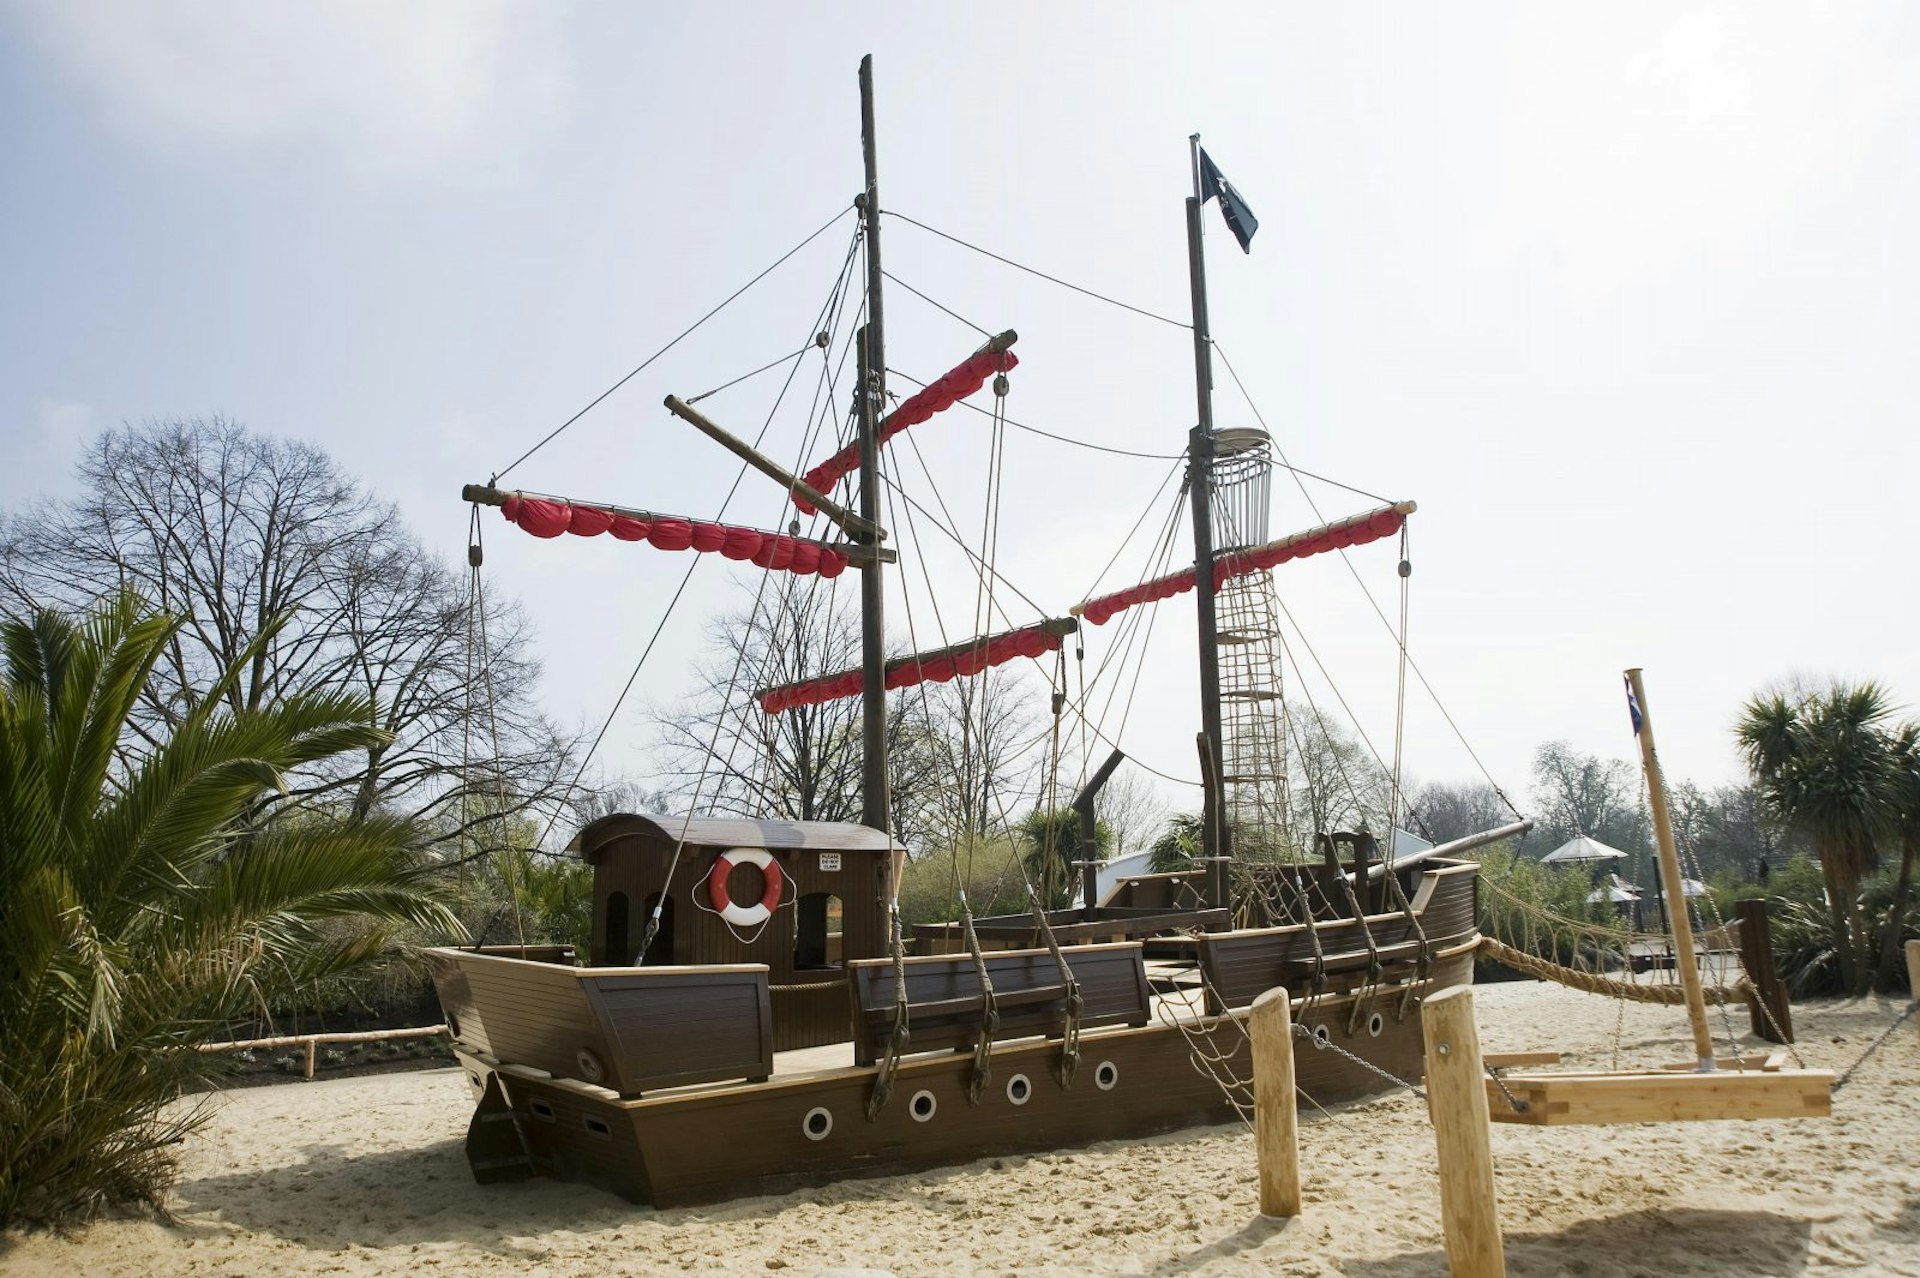 A climbing frame shaped like a pirate ship sits in a massive sandpit in Princess Diana Memorial Playground